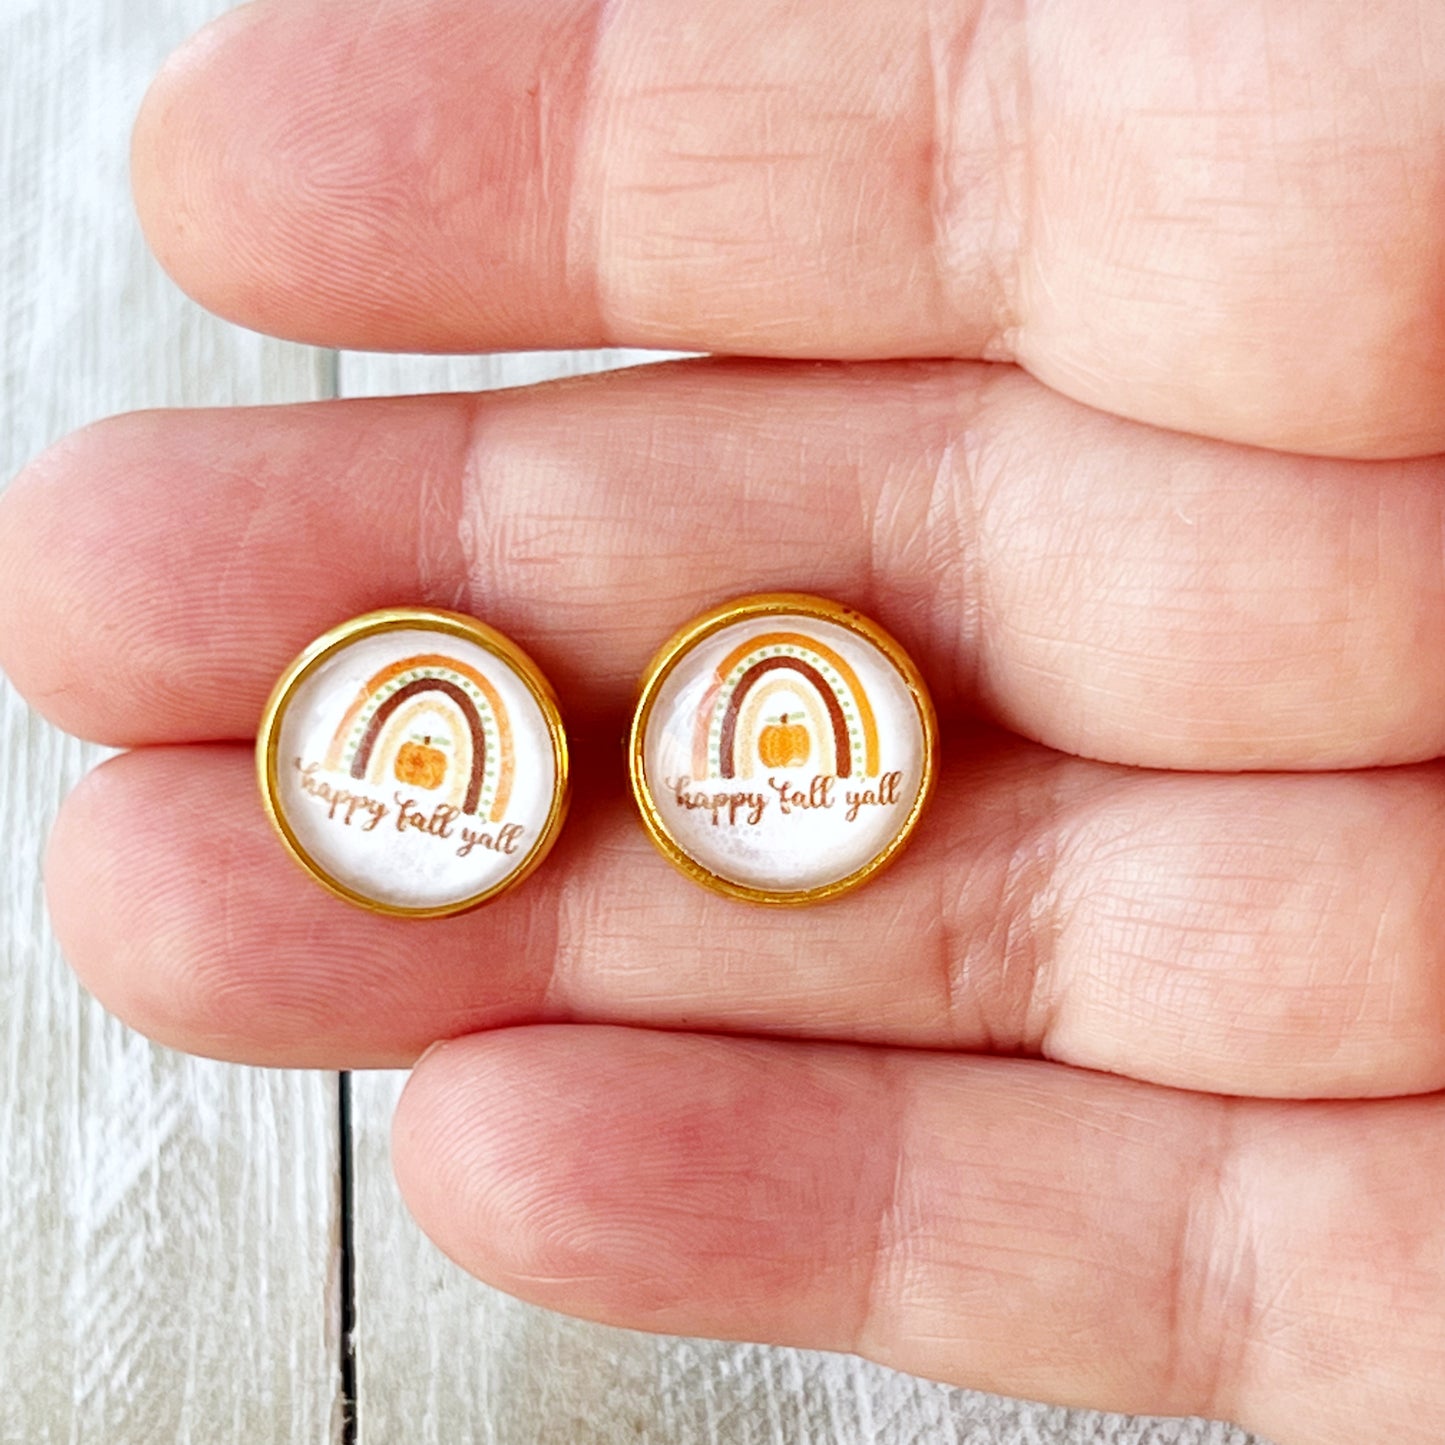 Boho Rainbow Happy Fall Y’all Gold Stud Earrings - Colorful & Festive Autumn Accessories